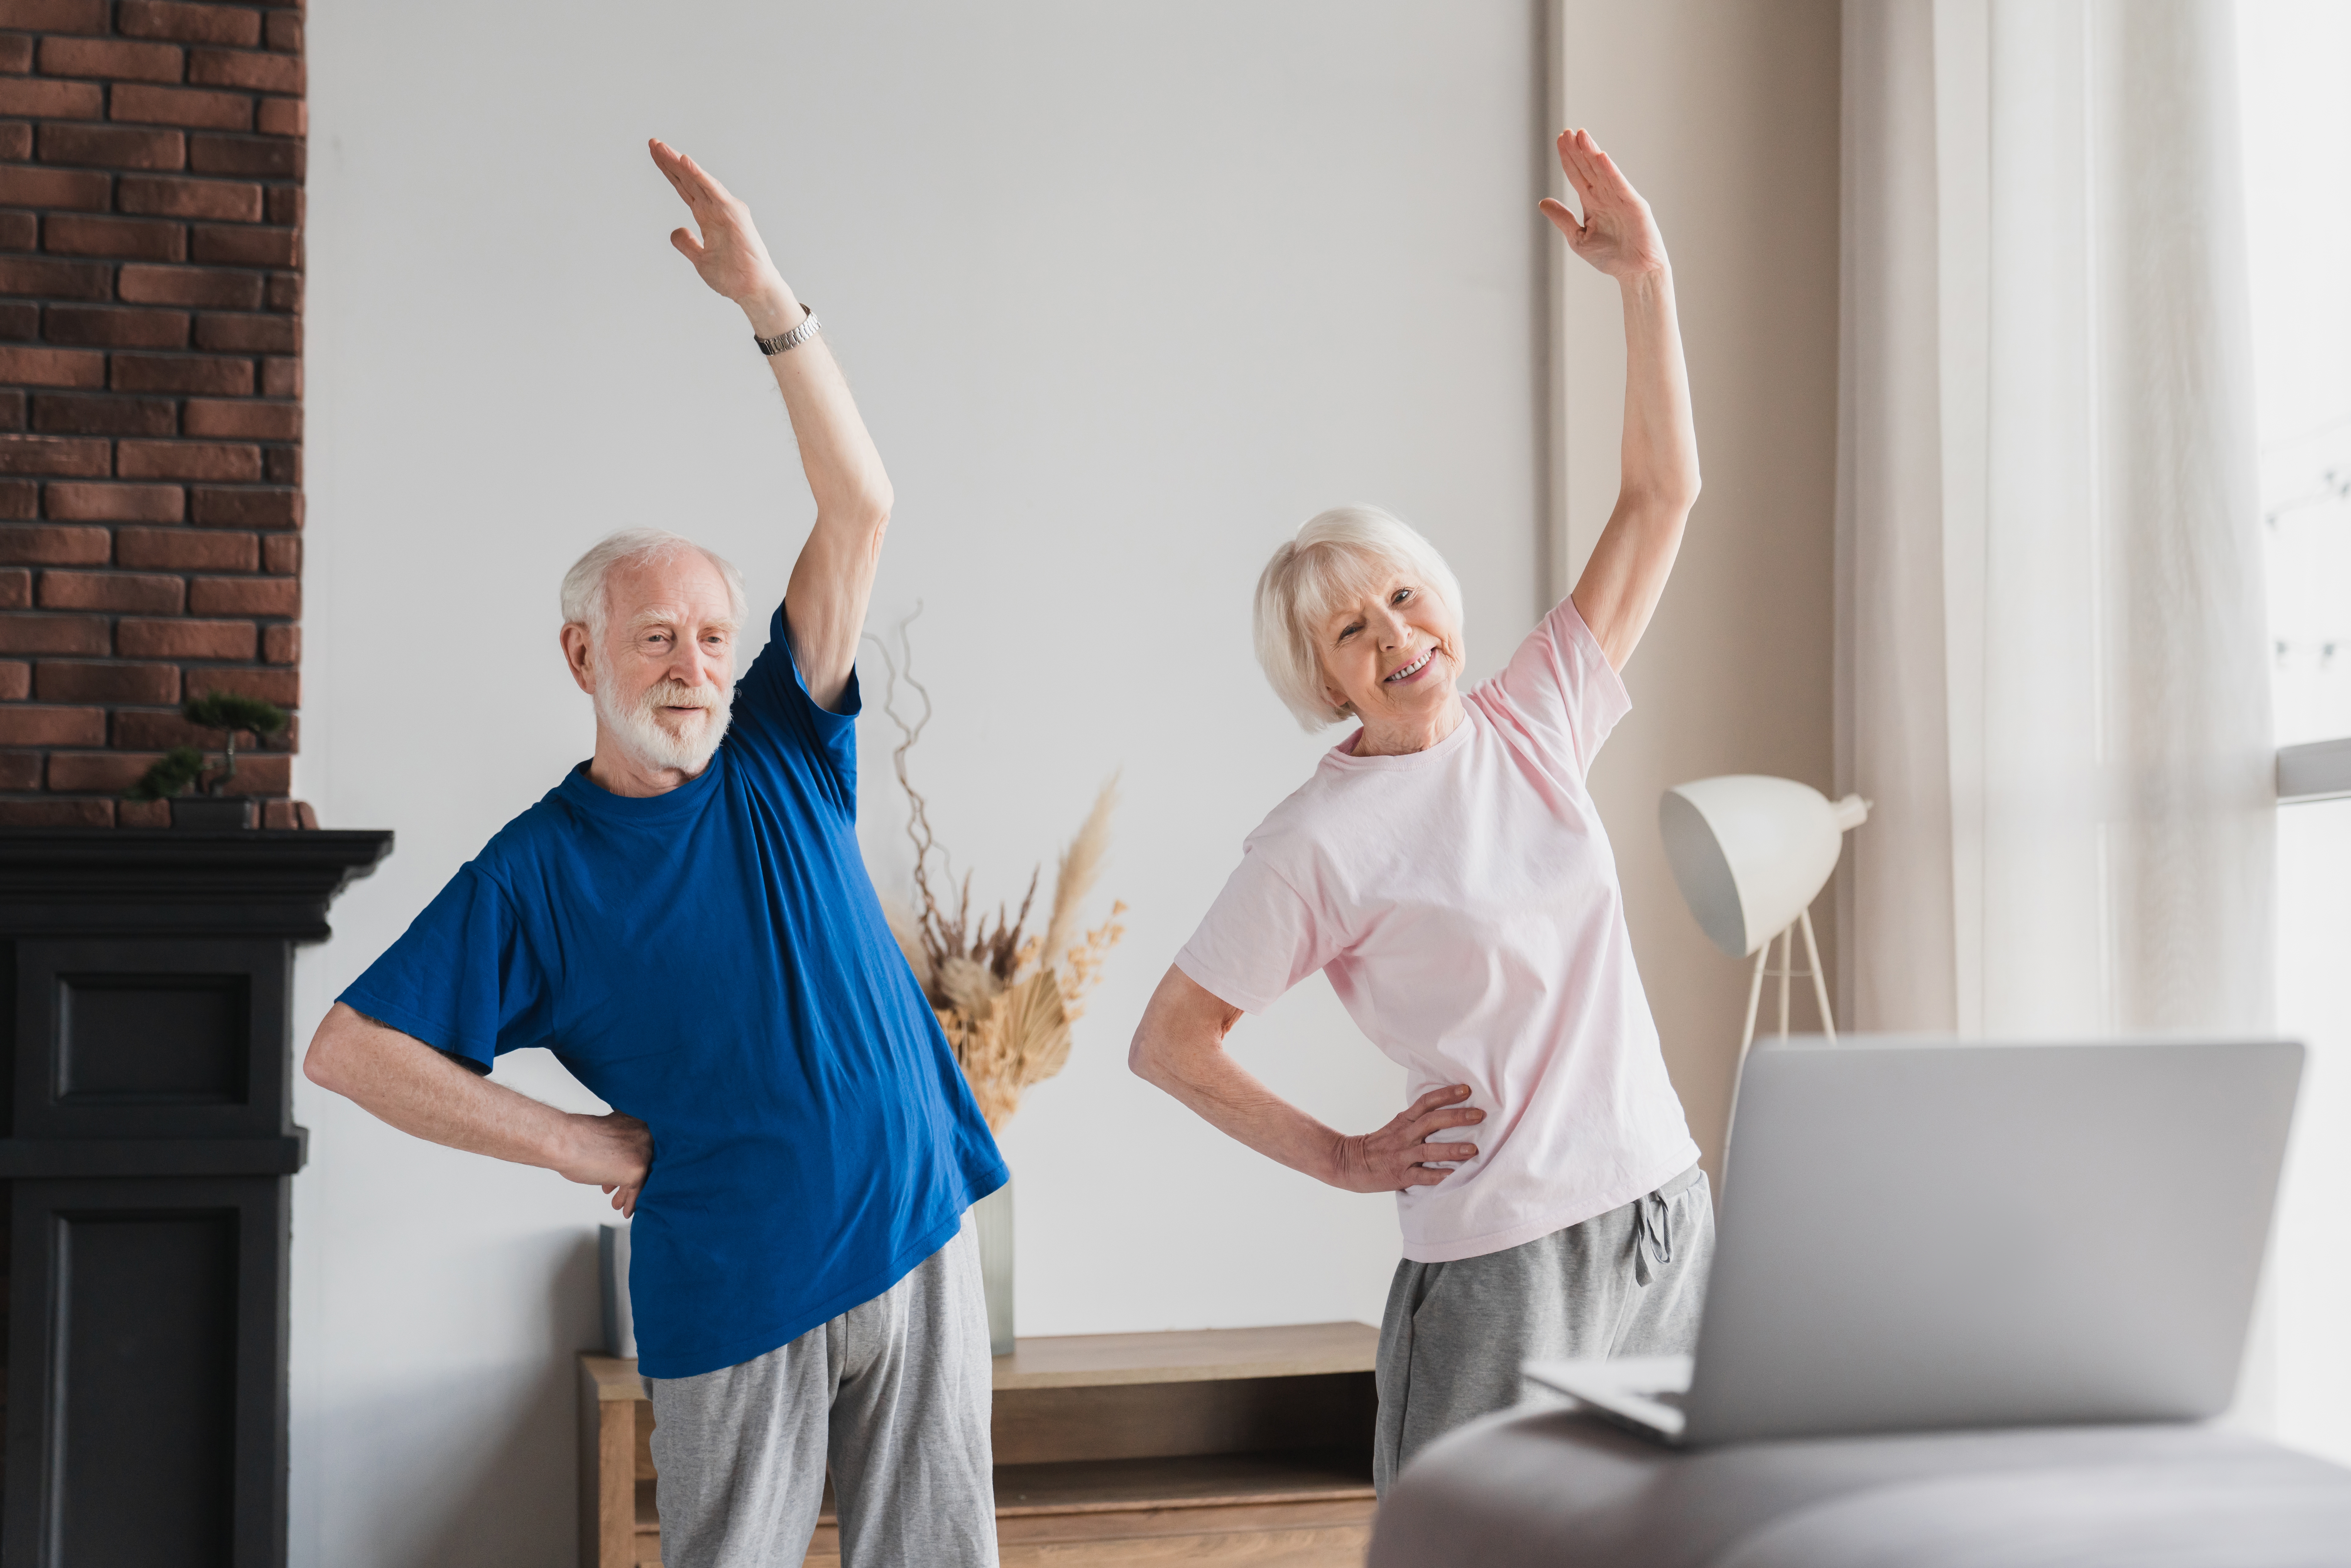 A senior couple doing fitness training indoors | Source: Shutterstock